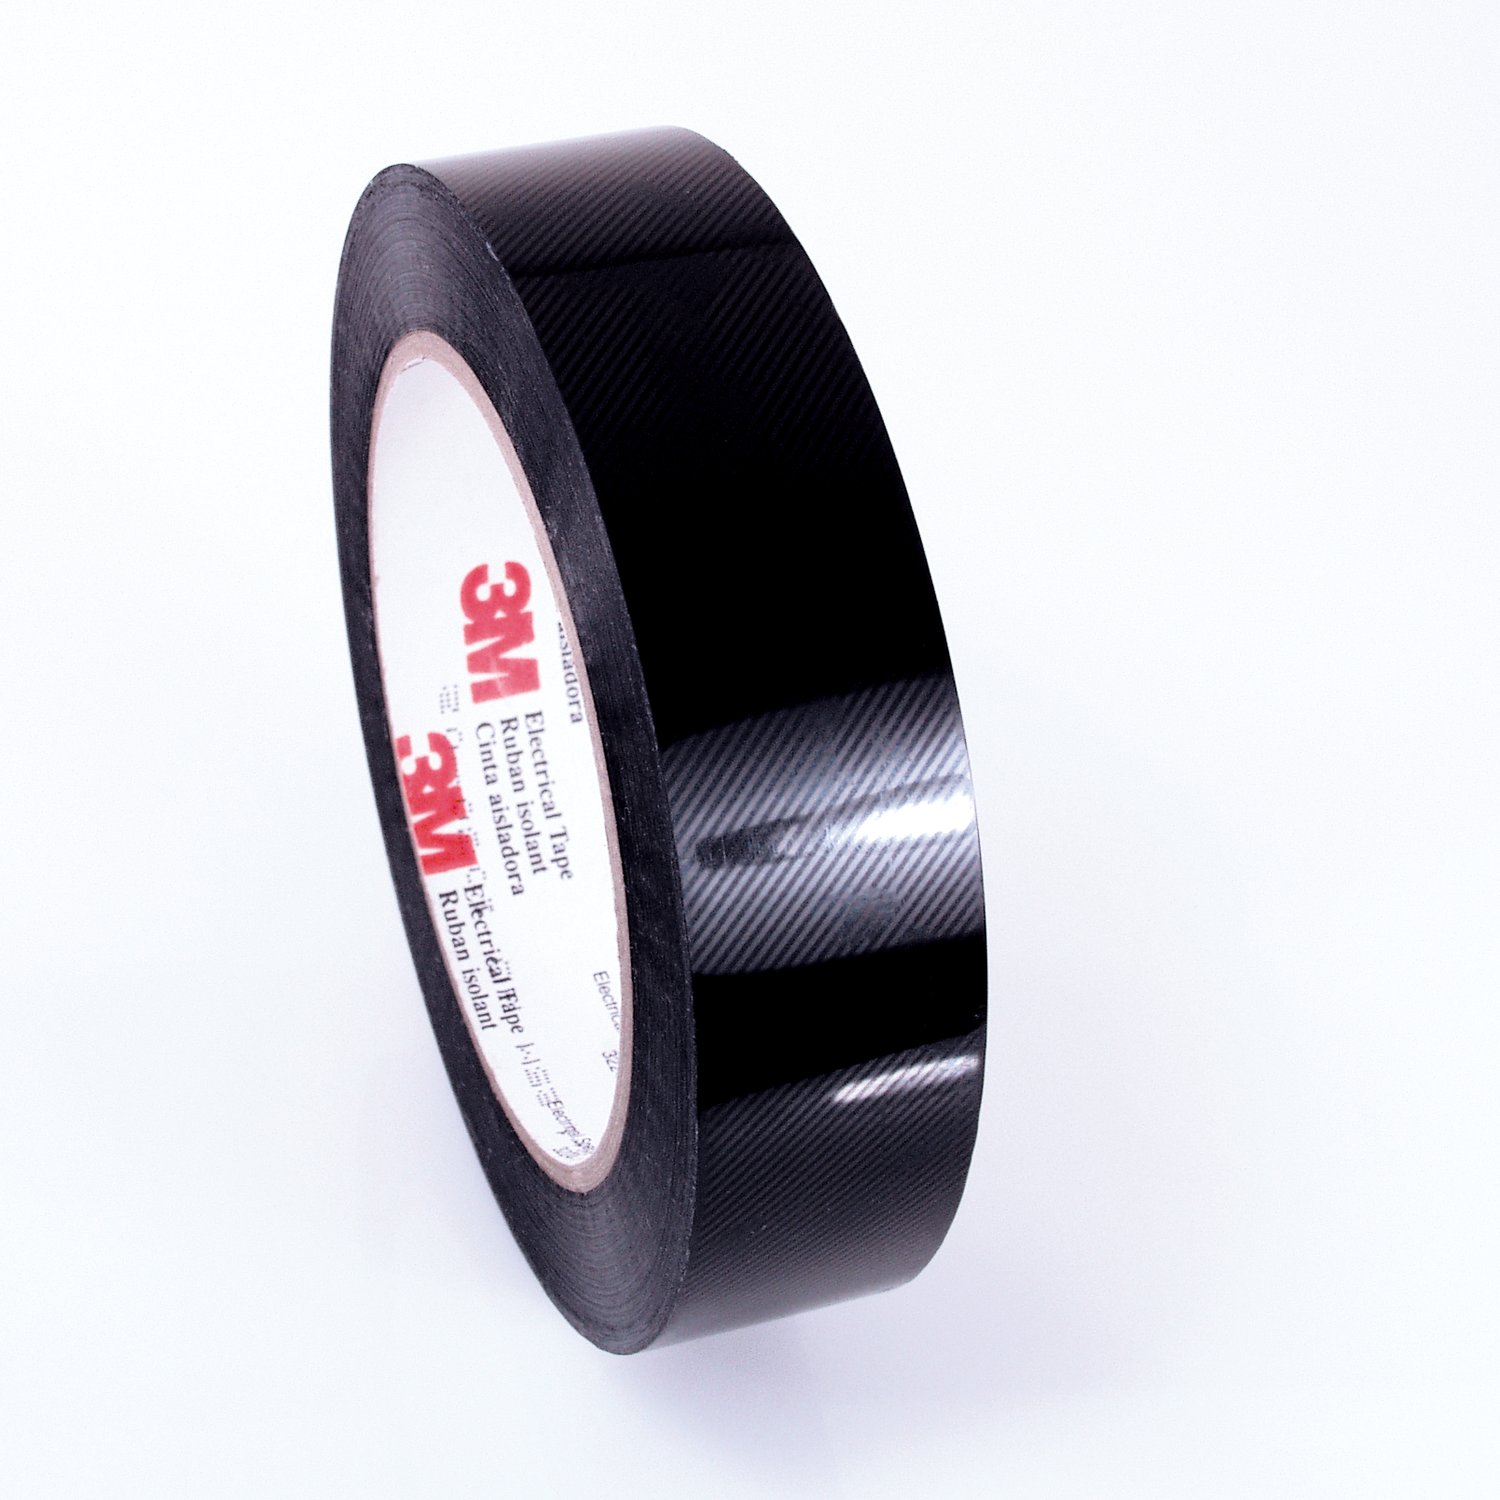 7100132439 - 3M Polyester Film Electrical Tape 1318-2, Configurable Product